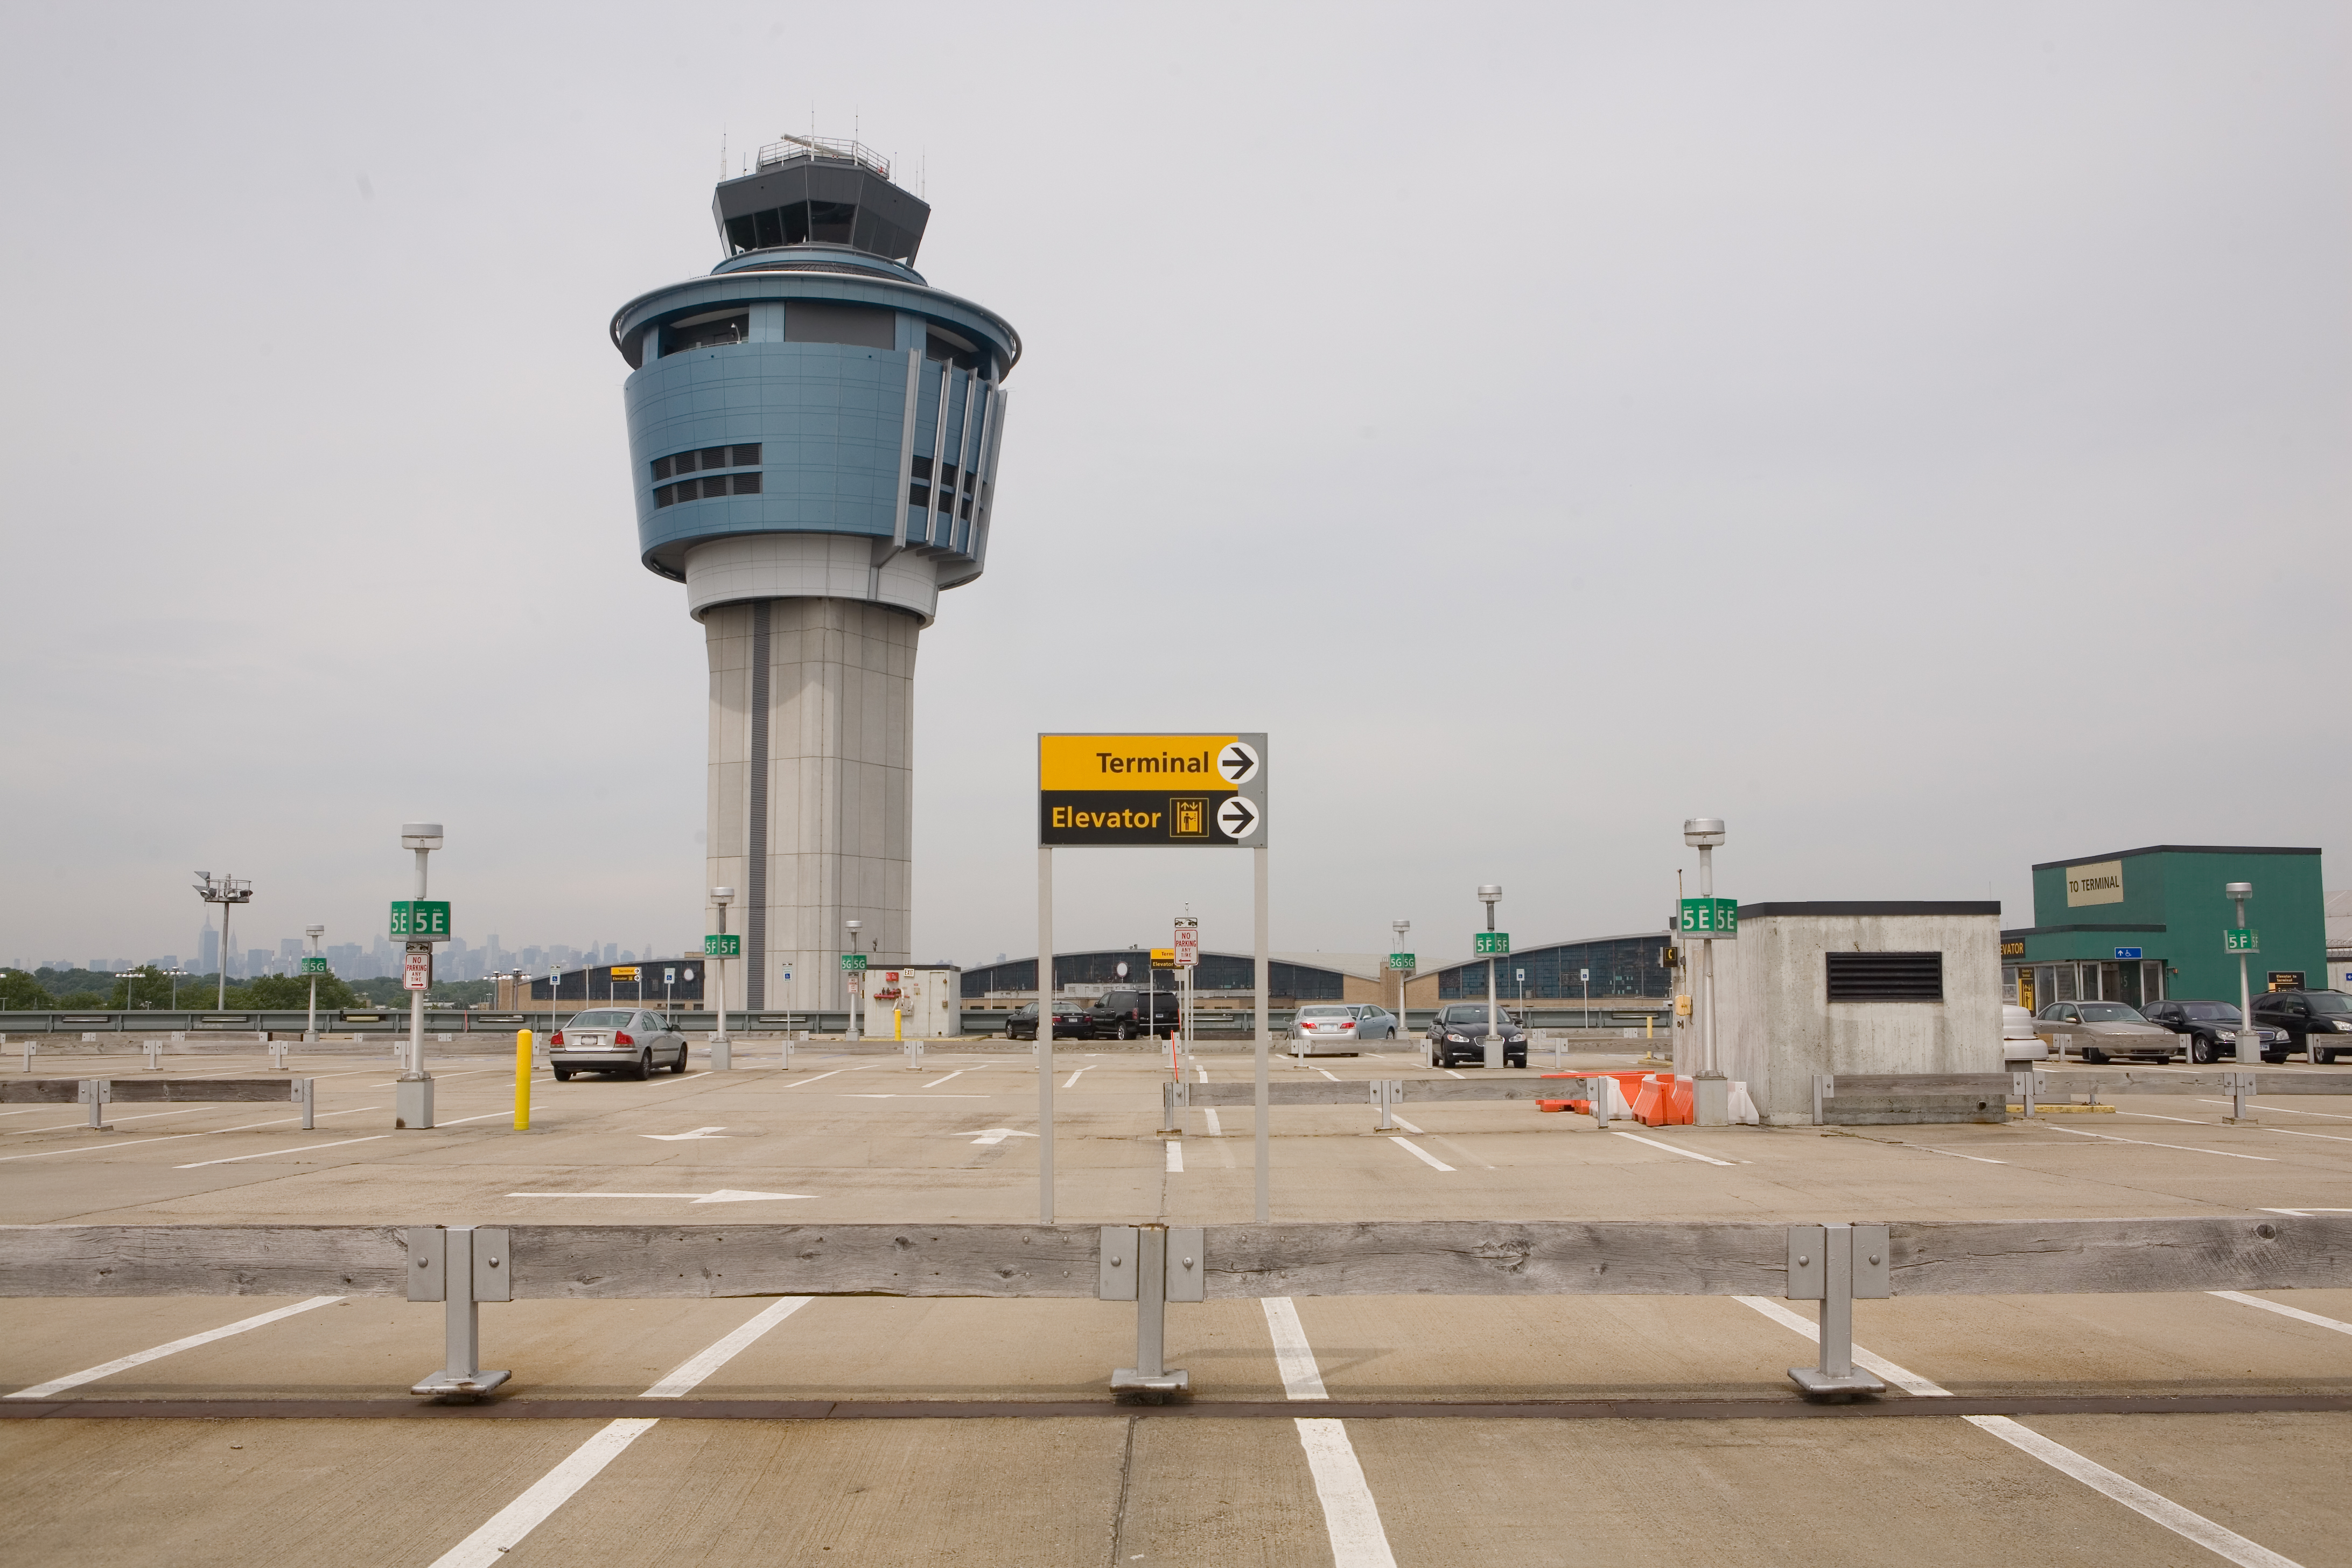 Parking lot and air traffic control tower at LaGuardia Airport, New York City (Skyhobo—Getty Images/iStockphoto)